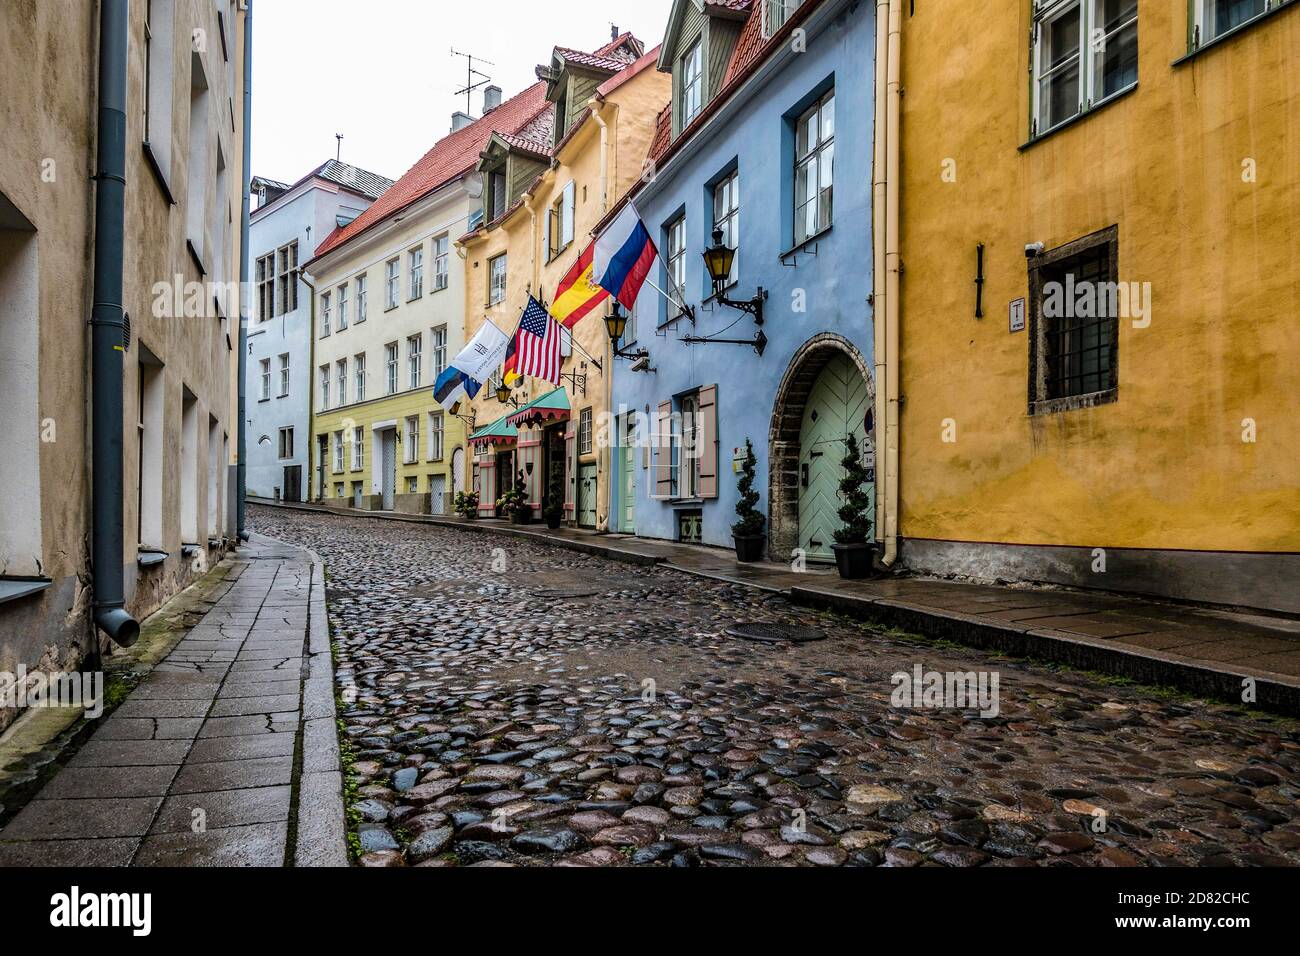 ESTONIA, TALLINN. The Capital of Estonia has one of the most attractive historic city centers of the Baltic states. Stock Photo